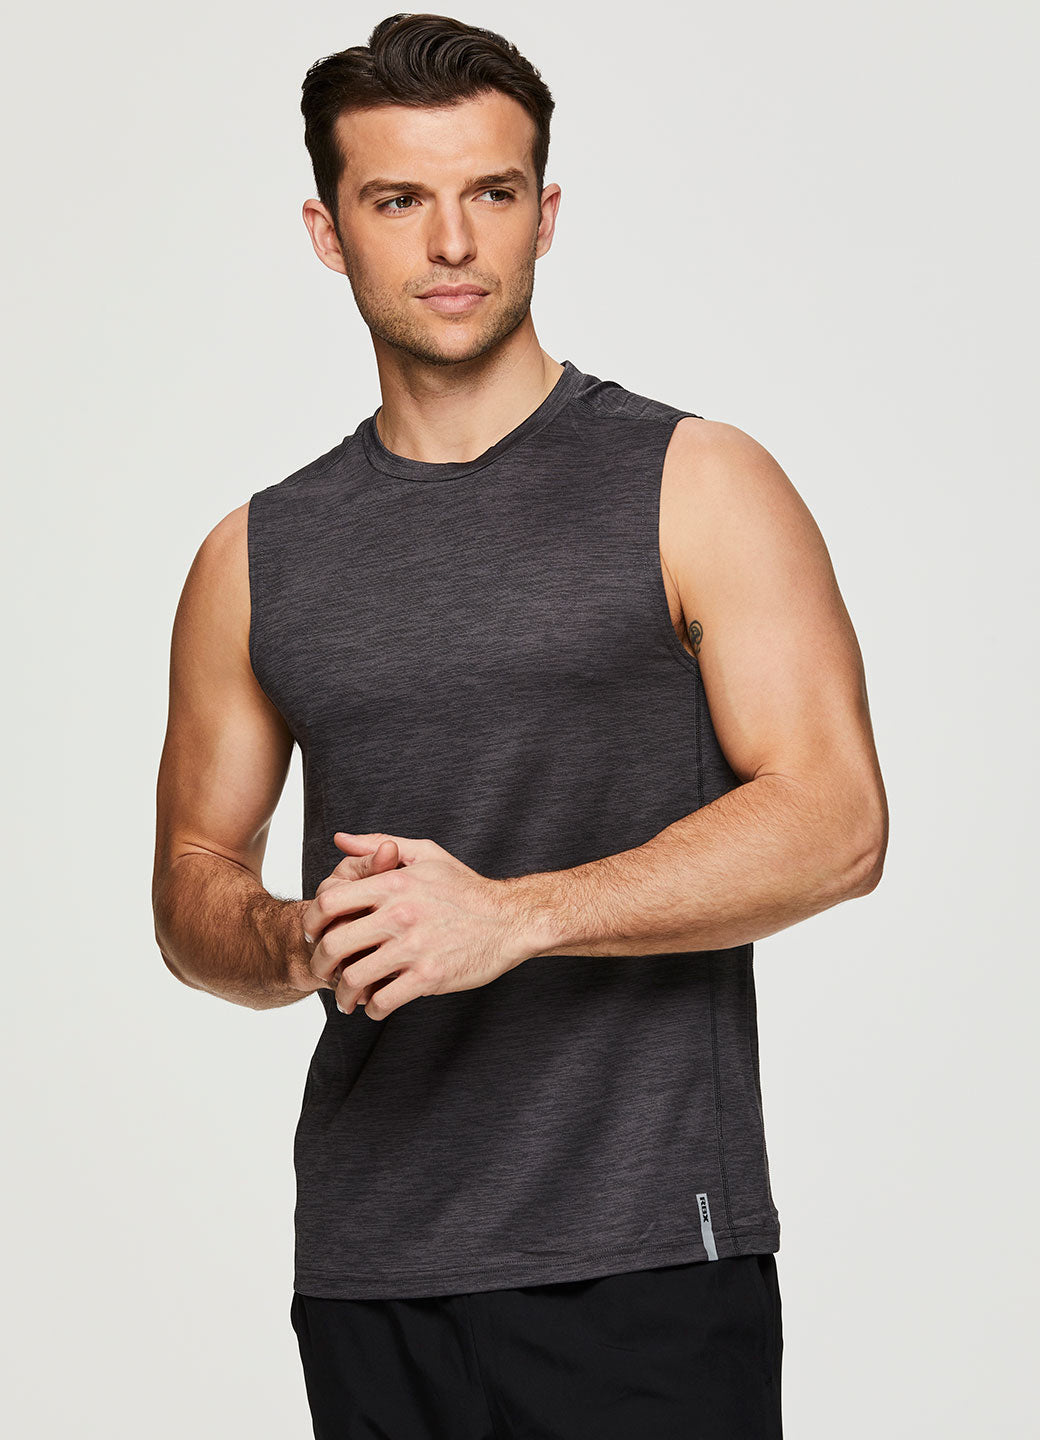 Prime Muscle Tank Top